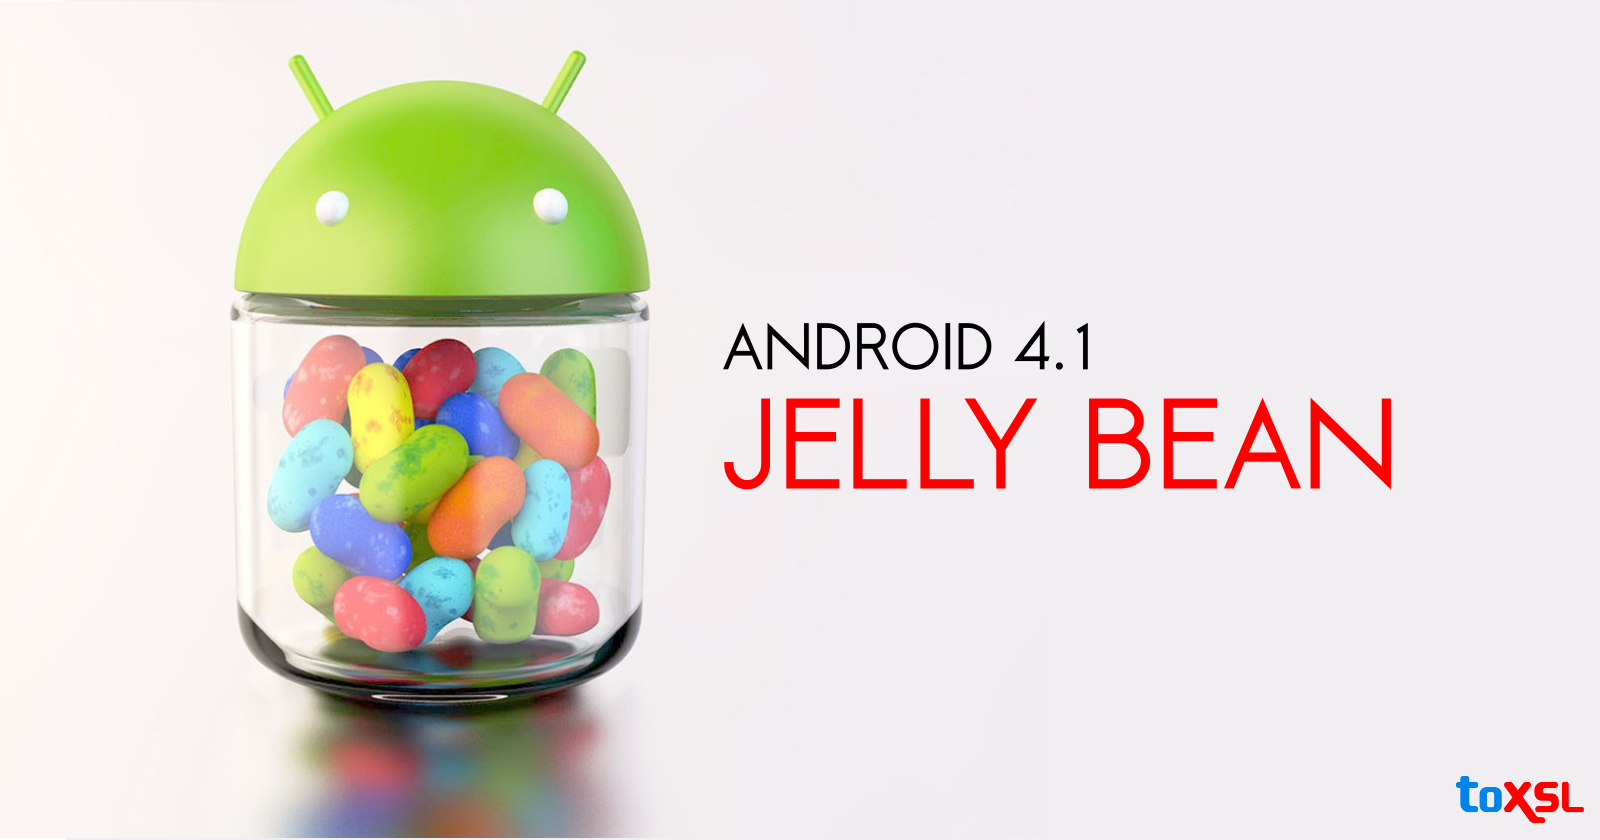 Google Introduced Android 4.1, Jelly Bean